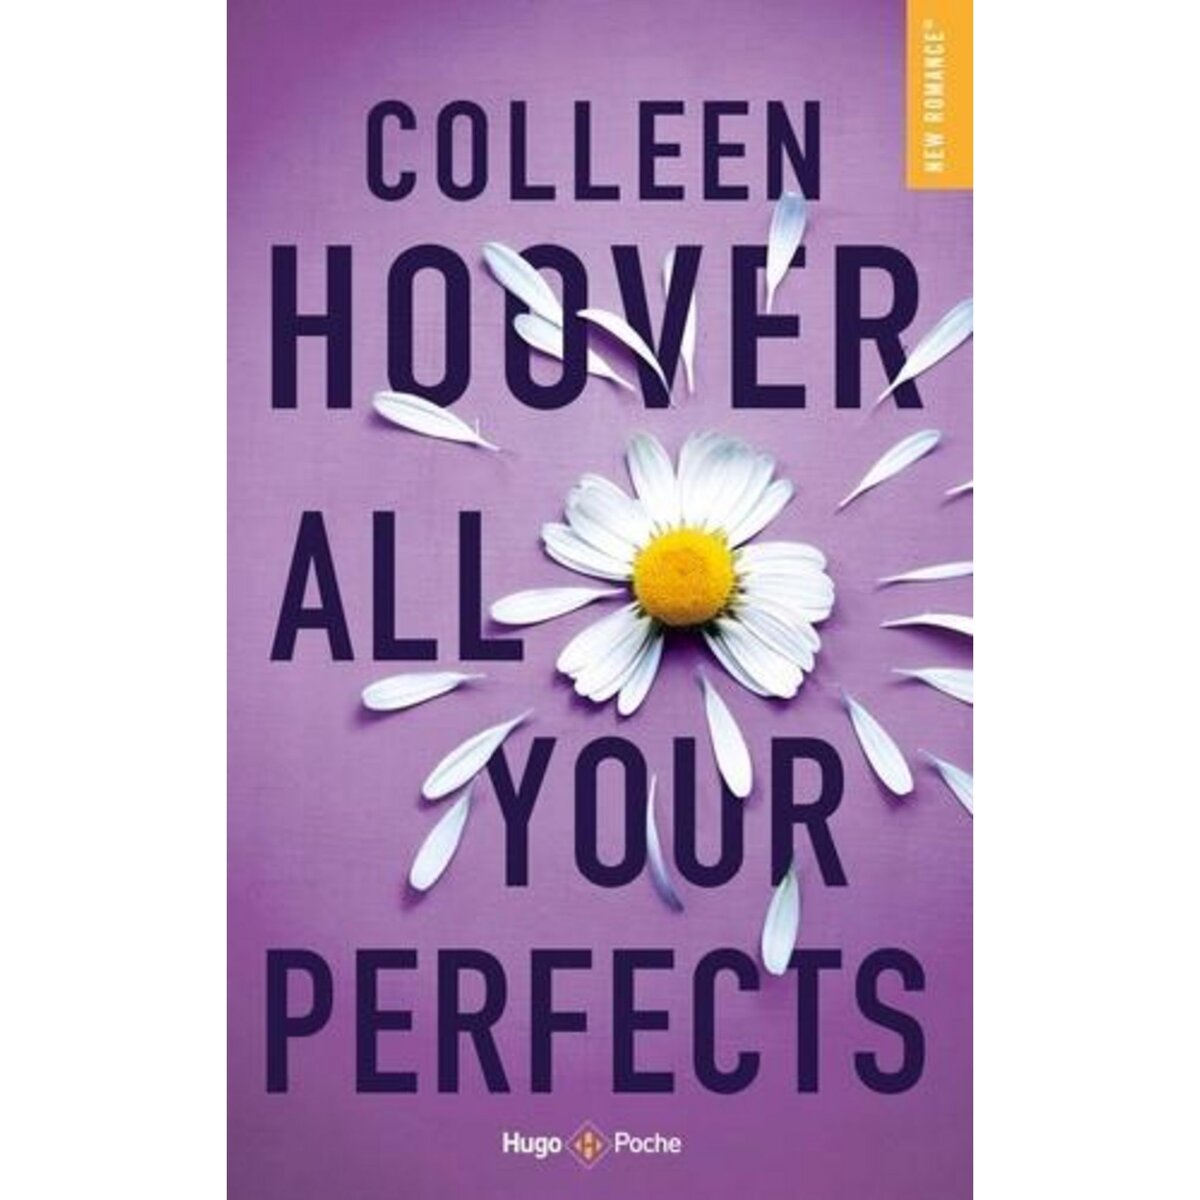  ALL YOUR PERFECTS, Hoover Colleen